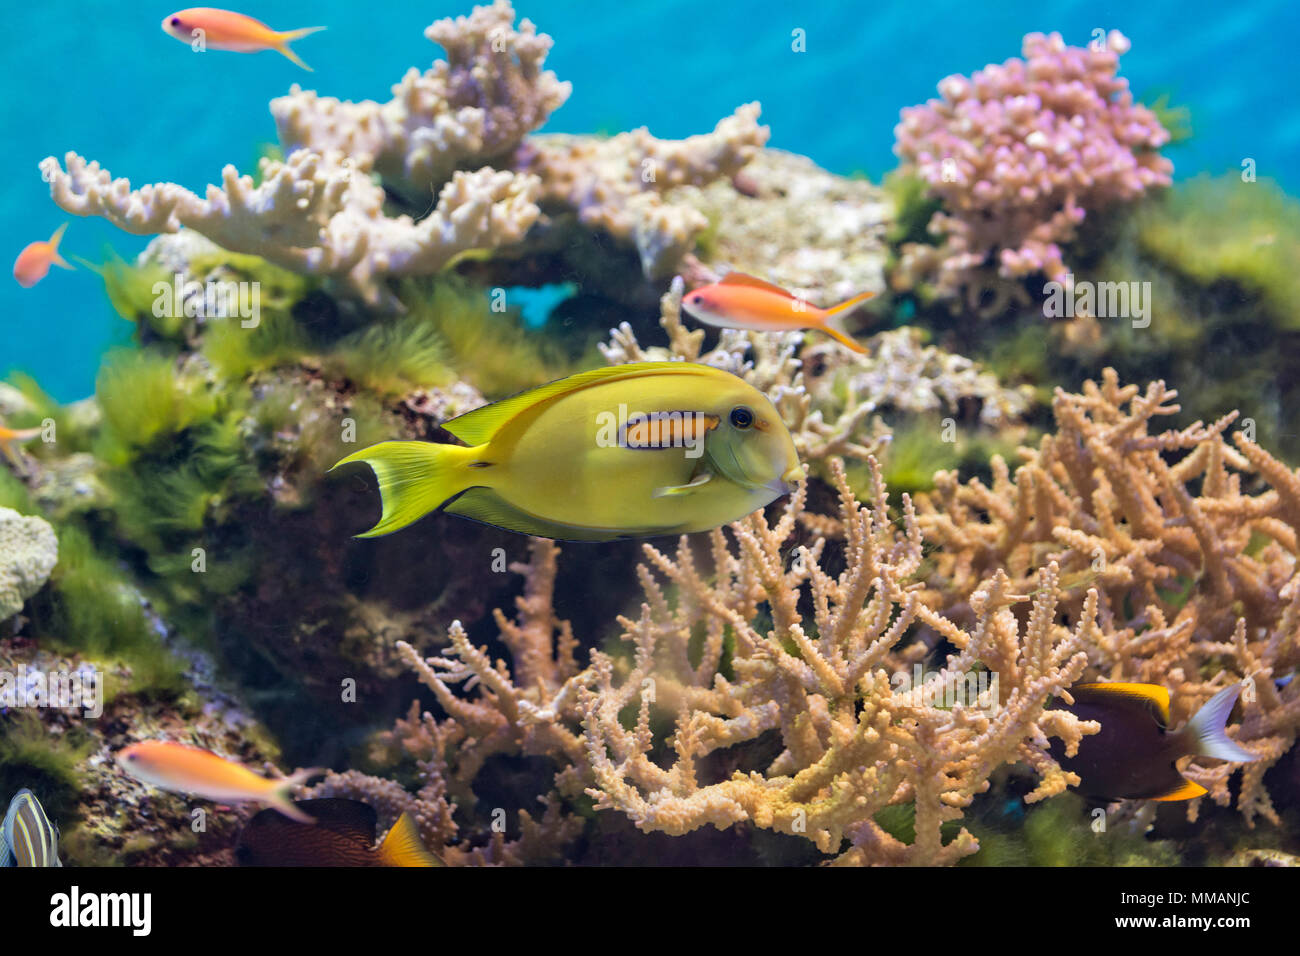 A colorful tropical fish swimming around a coral reef.  A bright yellow Orangepsot Surgeon fish in the center. Stock Photo